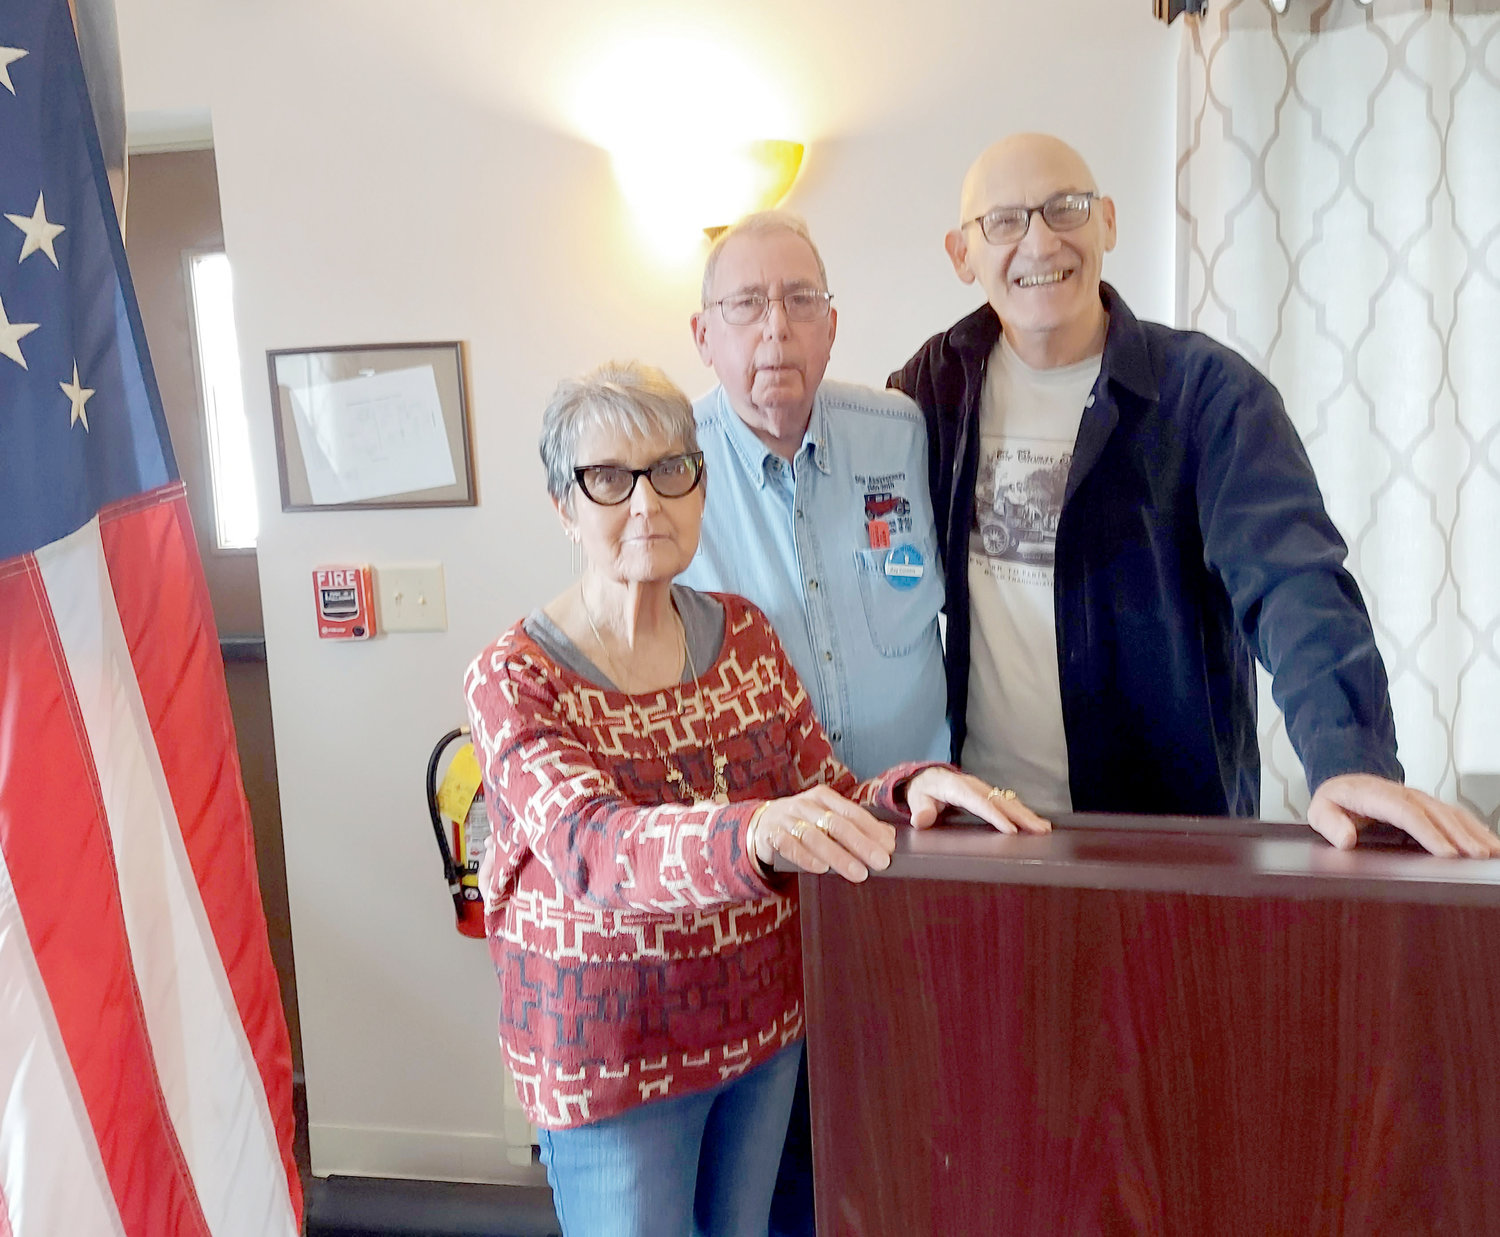 John Taibi, a local author, was the guest speaker at the Mohican Model A Ford Club. From left: Judy and Ray Cousins, of the Mohican Model A Ford Club, and Taibi.